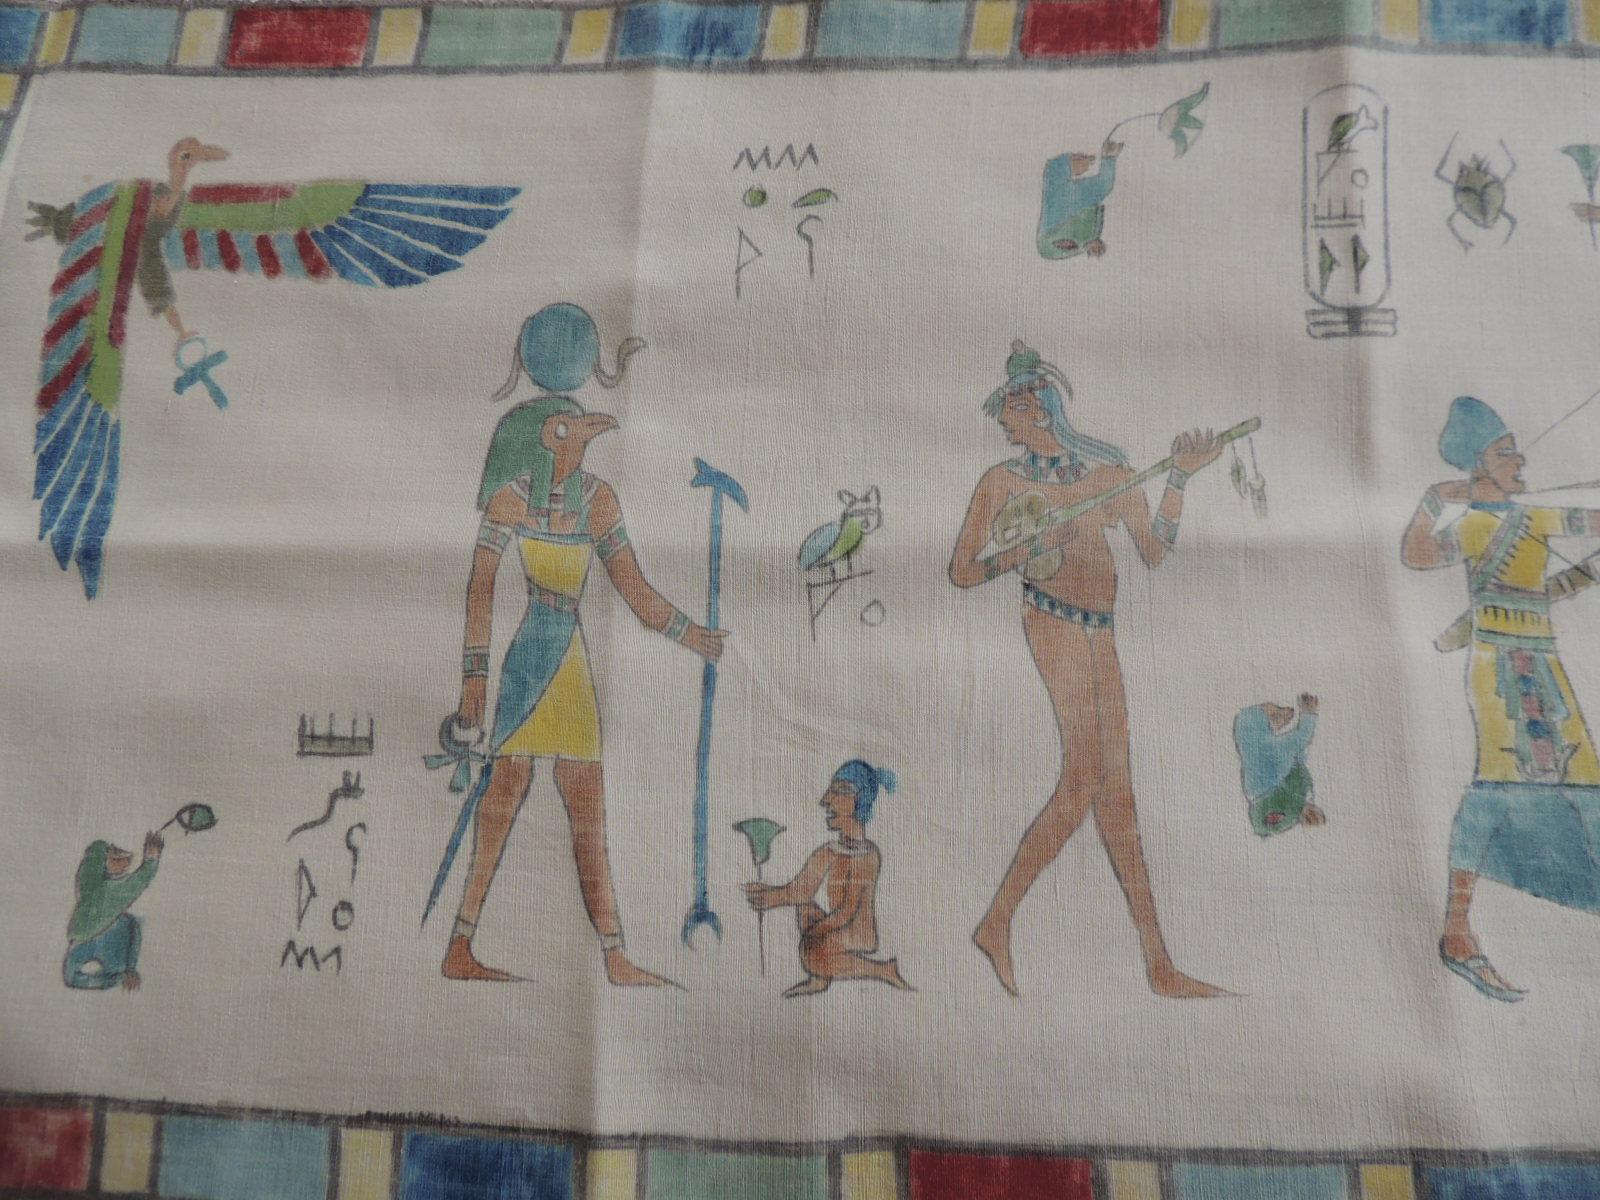 Egyptian revival style hand painted textile.
Colorful painted textile depicting animals and figures. 
With a natural color linen backing.
Ideal for a pillow or to frame.
Sold as is.
Size: 12.5